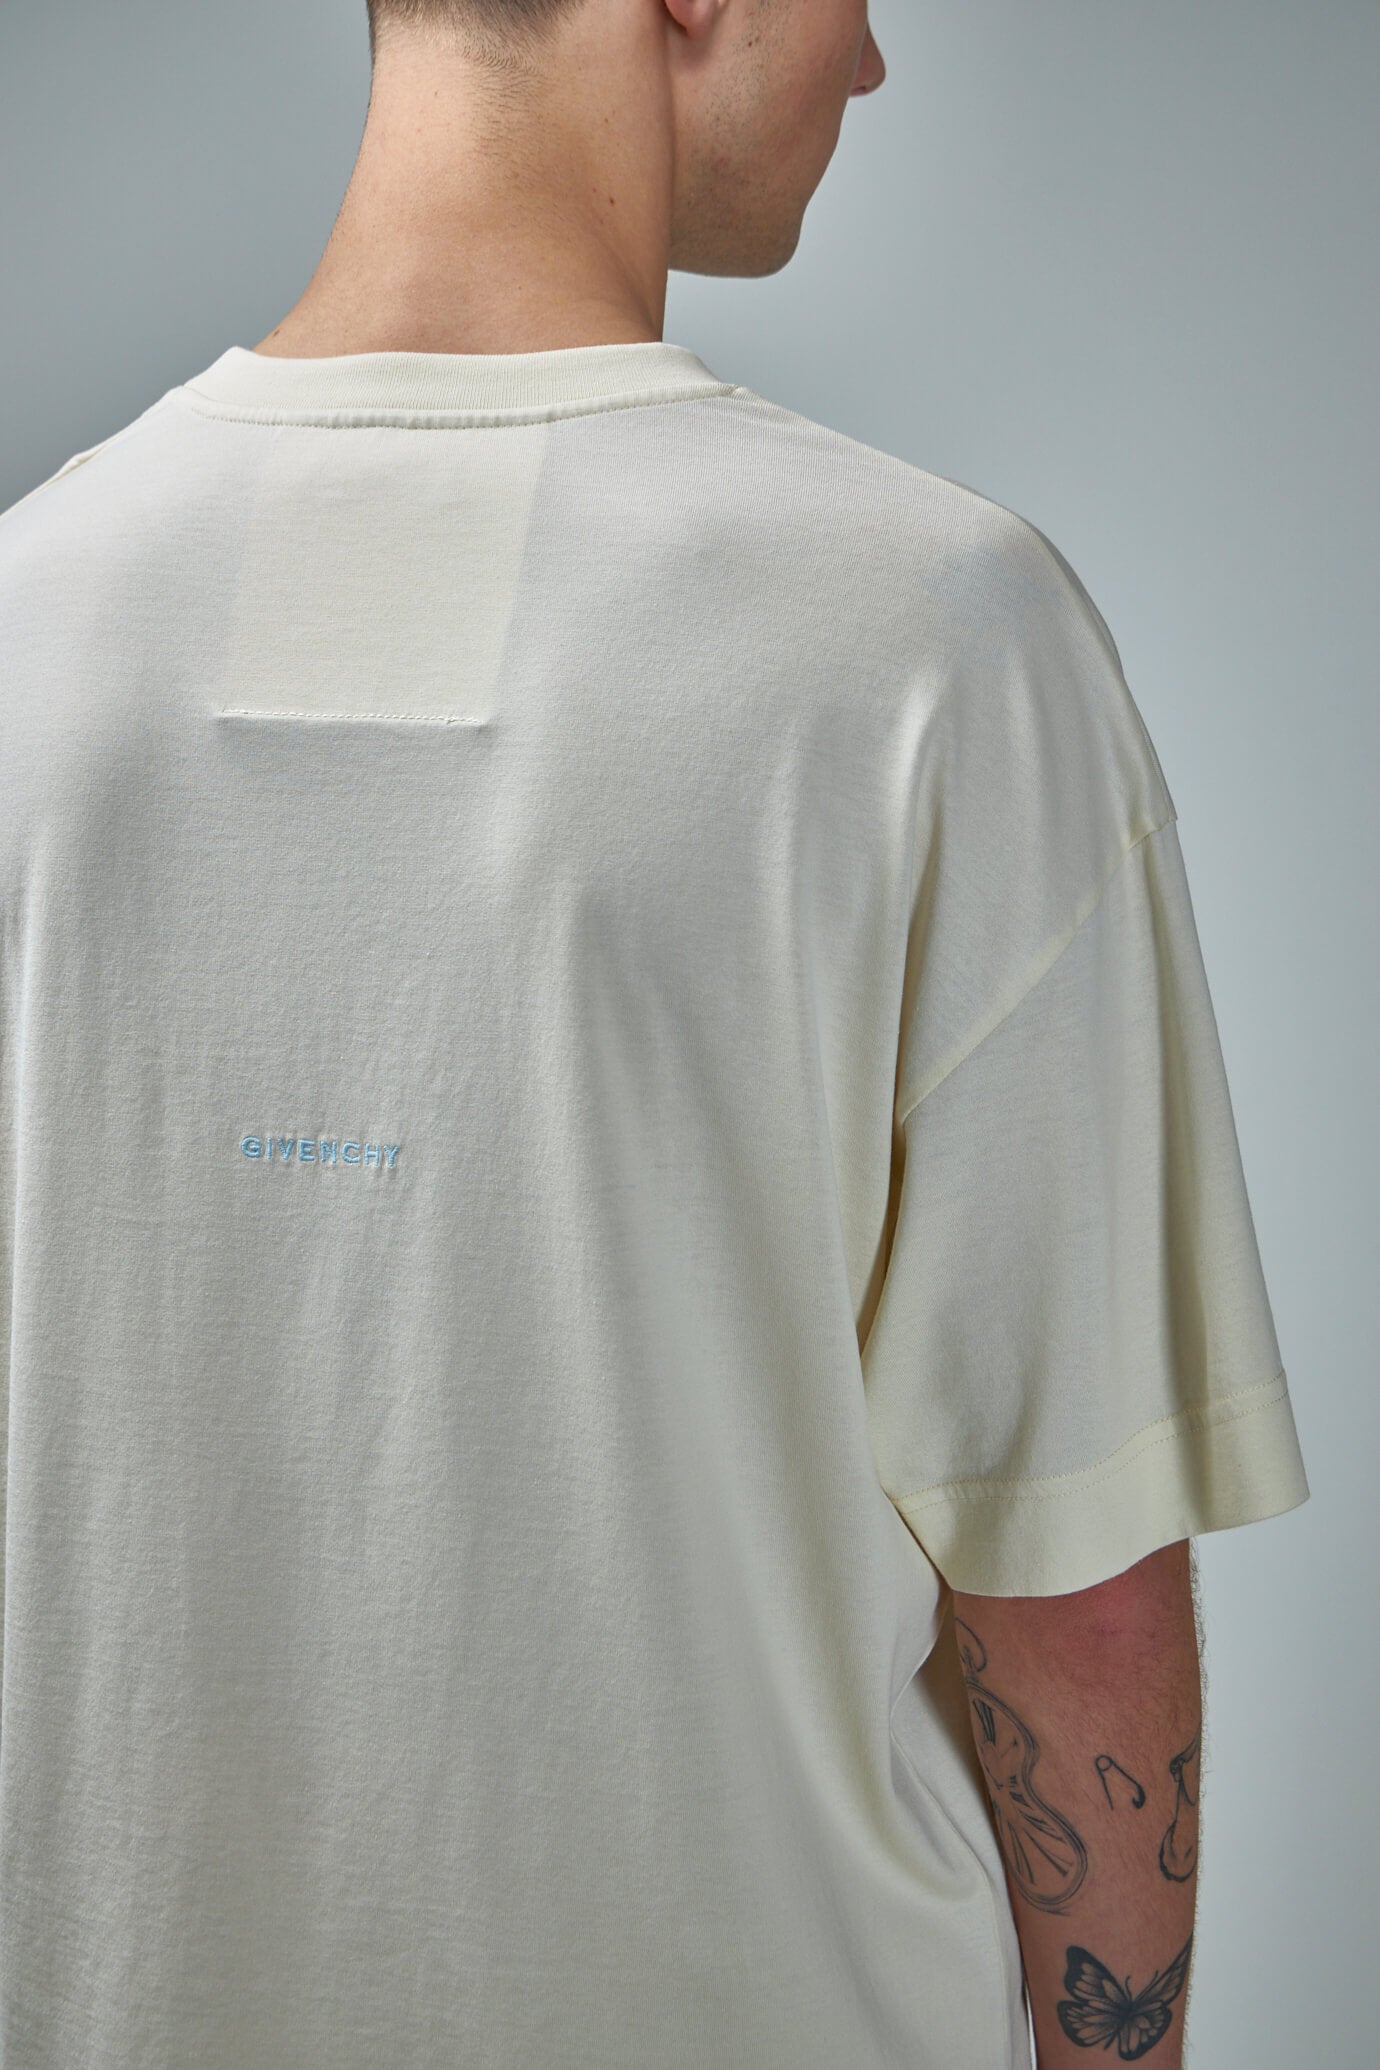 T-shirt in Cotton